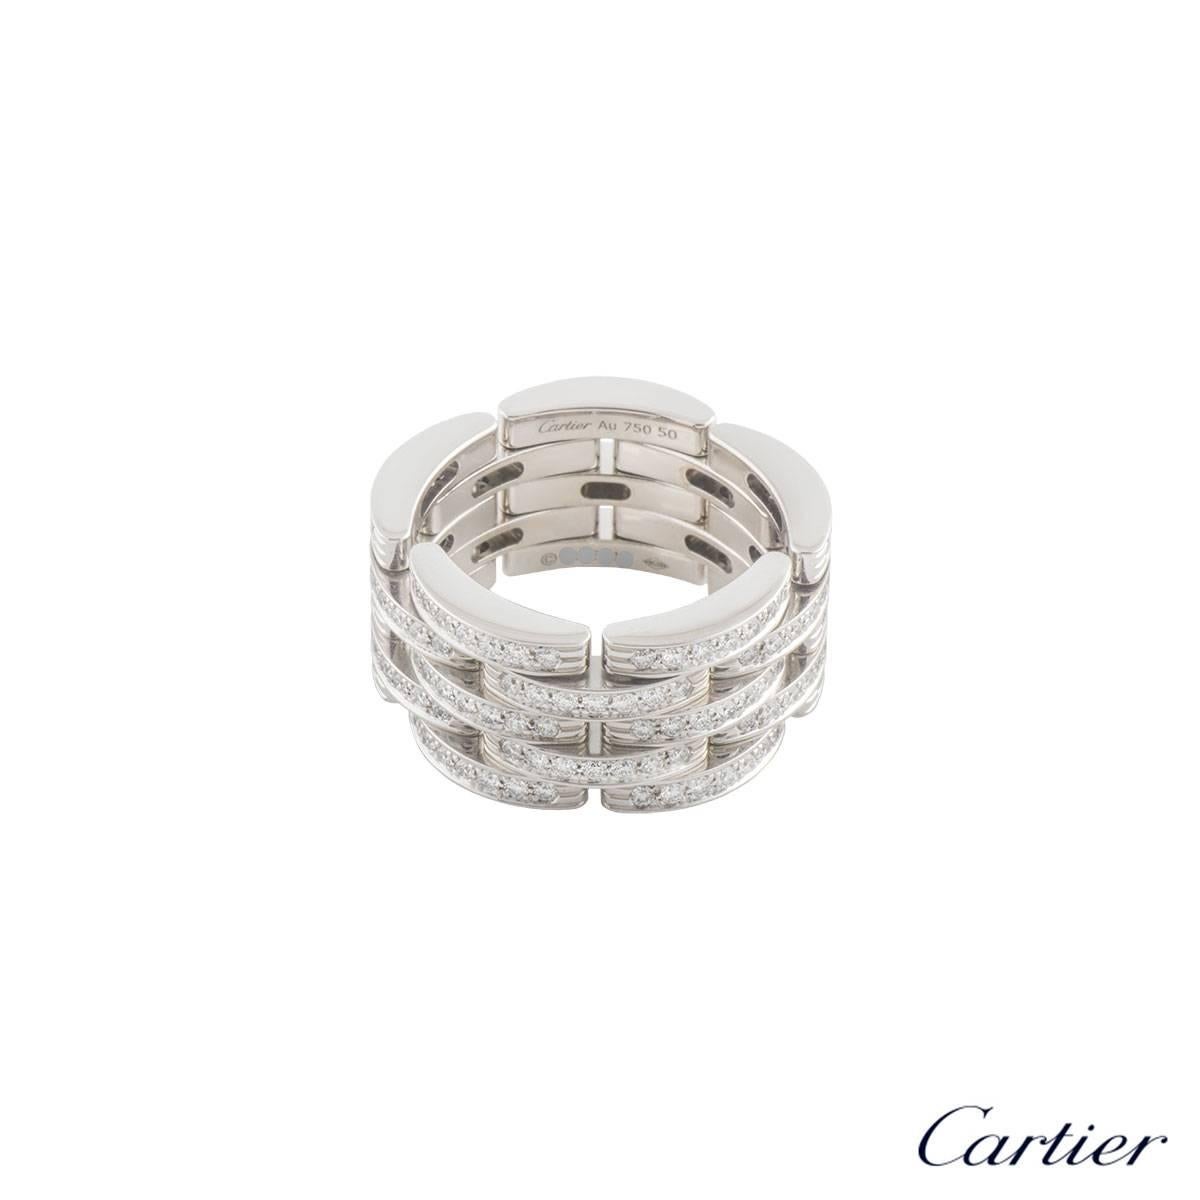 A stunning diamond Cartier Maillon Panthere ring from the Links and Chain collection. The ring comprises of 25 open brick work design panels with each panel pave set with 7 round brilliant cut diamonds totalling approximately 1.26ct, G colour and VS